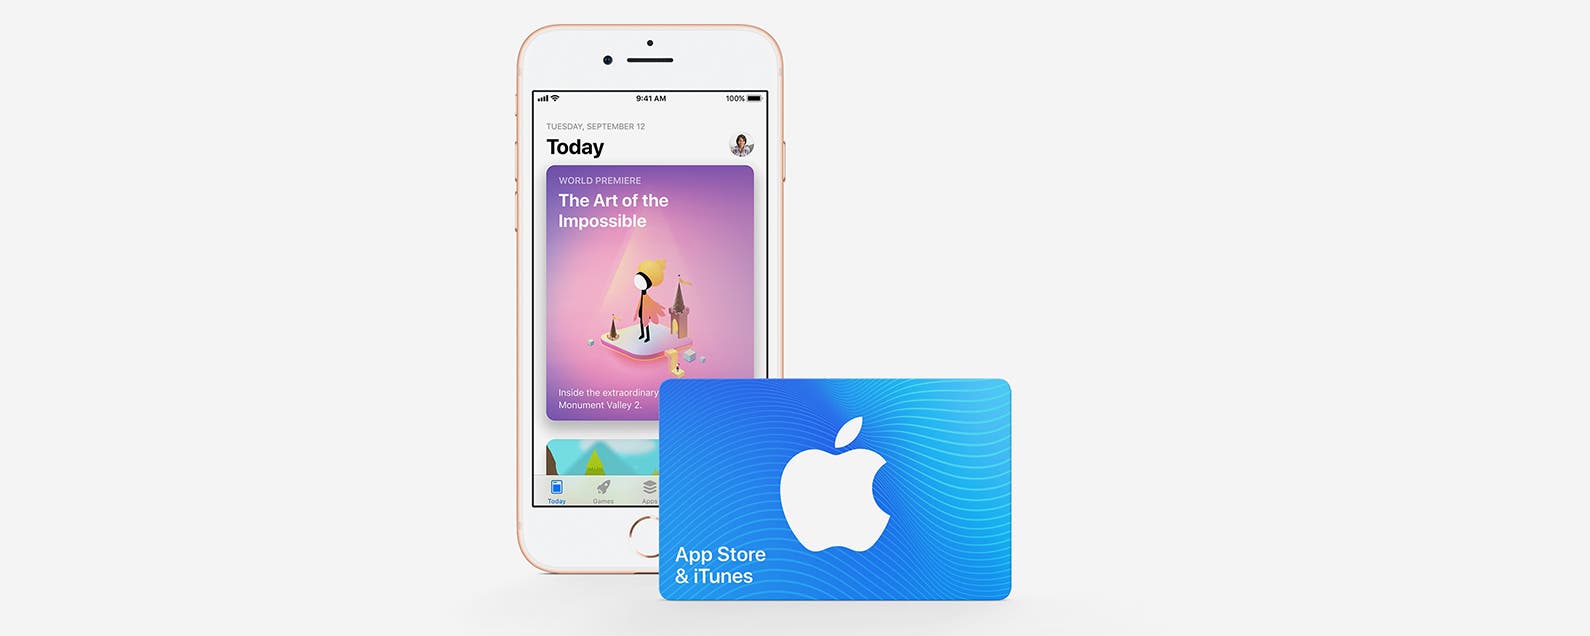 How To Use An Itunes Gift Card With Family Sharing 2019 - roblox wont load on ipod touch